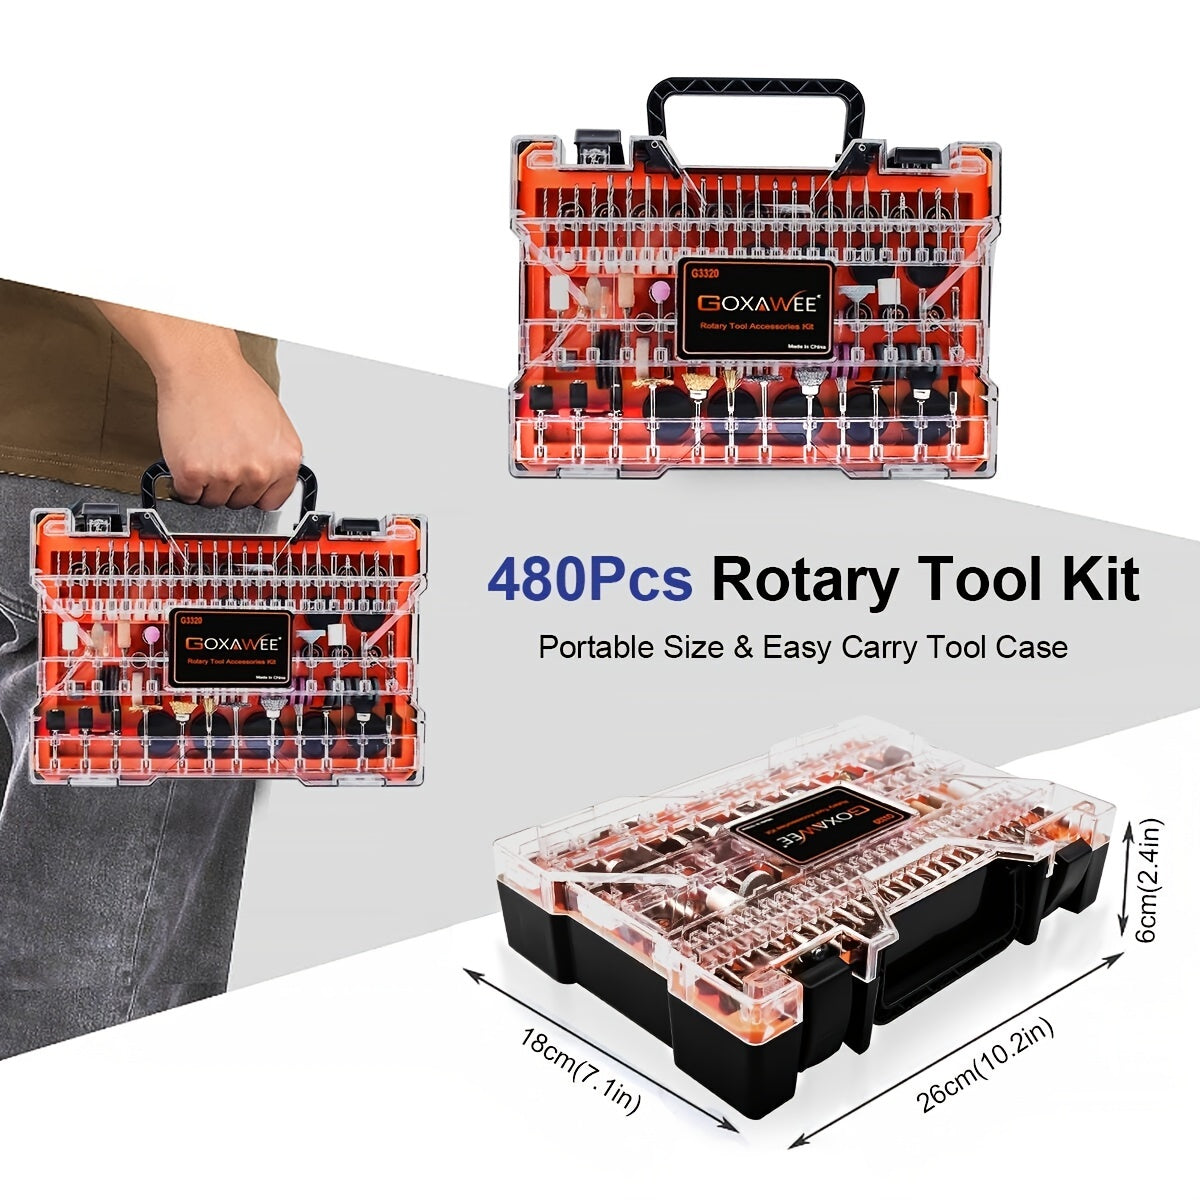 480Pcs Rotary Tool Accessories Kit: Cut, Drill, Grind, Polish, Engrave & Sand With 1/8 Inch Shank!